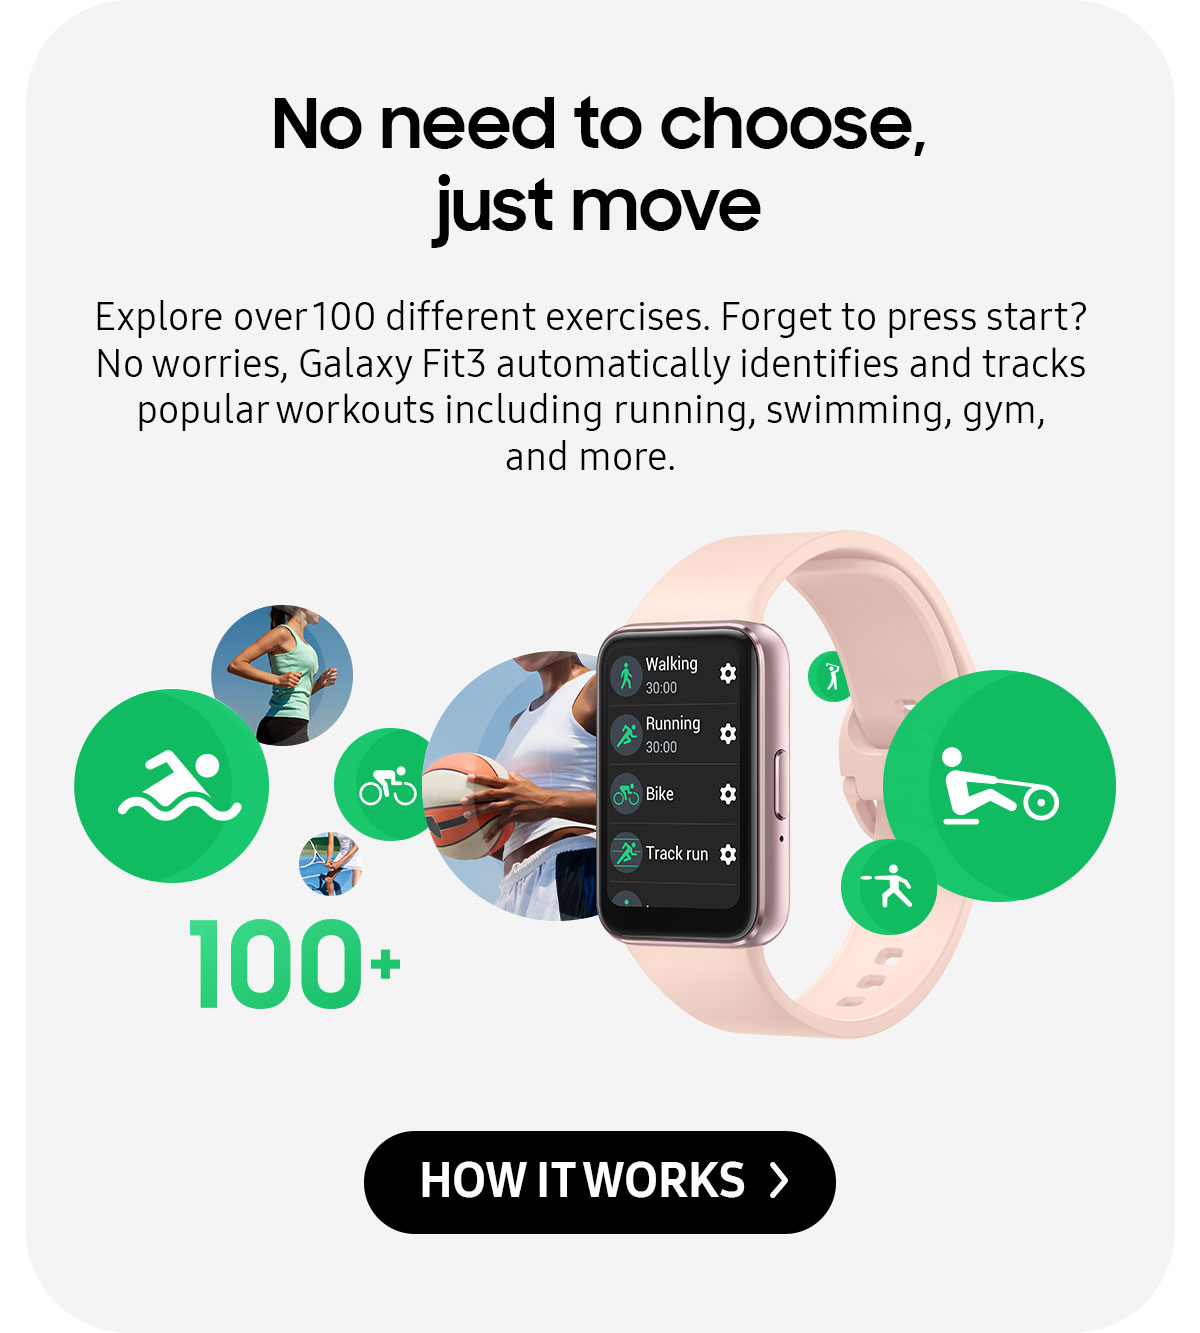 No need to choose, just move | Explore over 100 different exercises. Forget to press start? No worries, Galaxy Fit3 automatically identifies and tracks popular workouts including running, swimming, gym, and more.